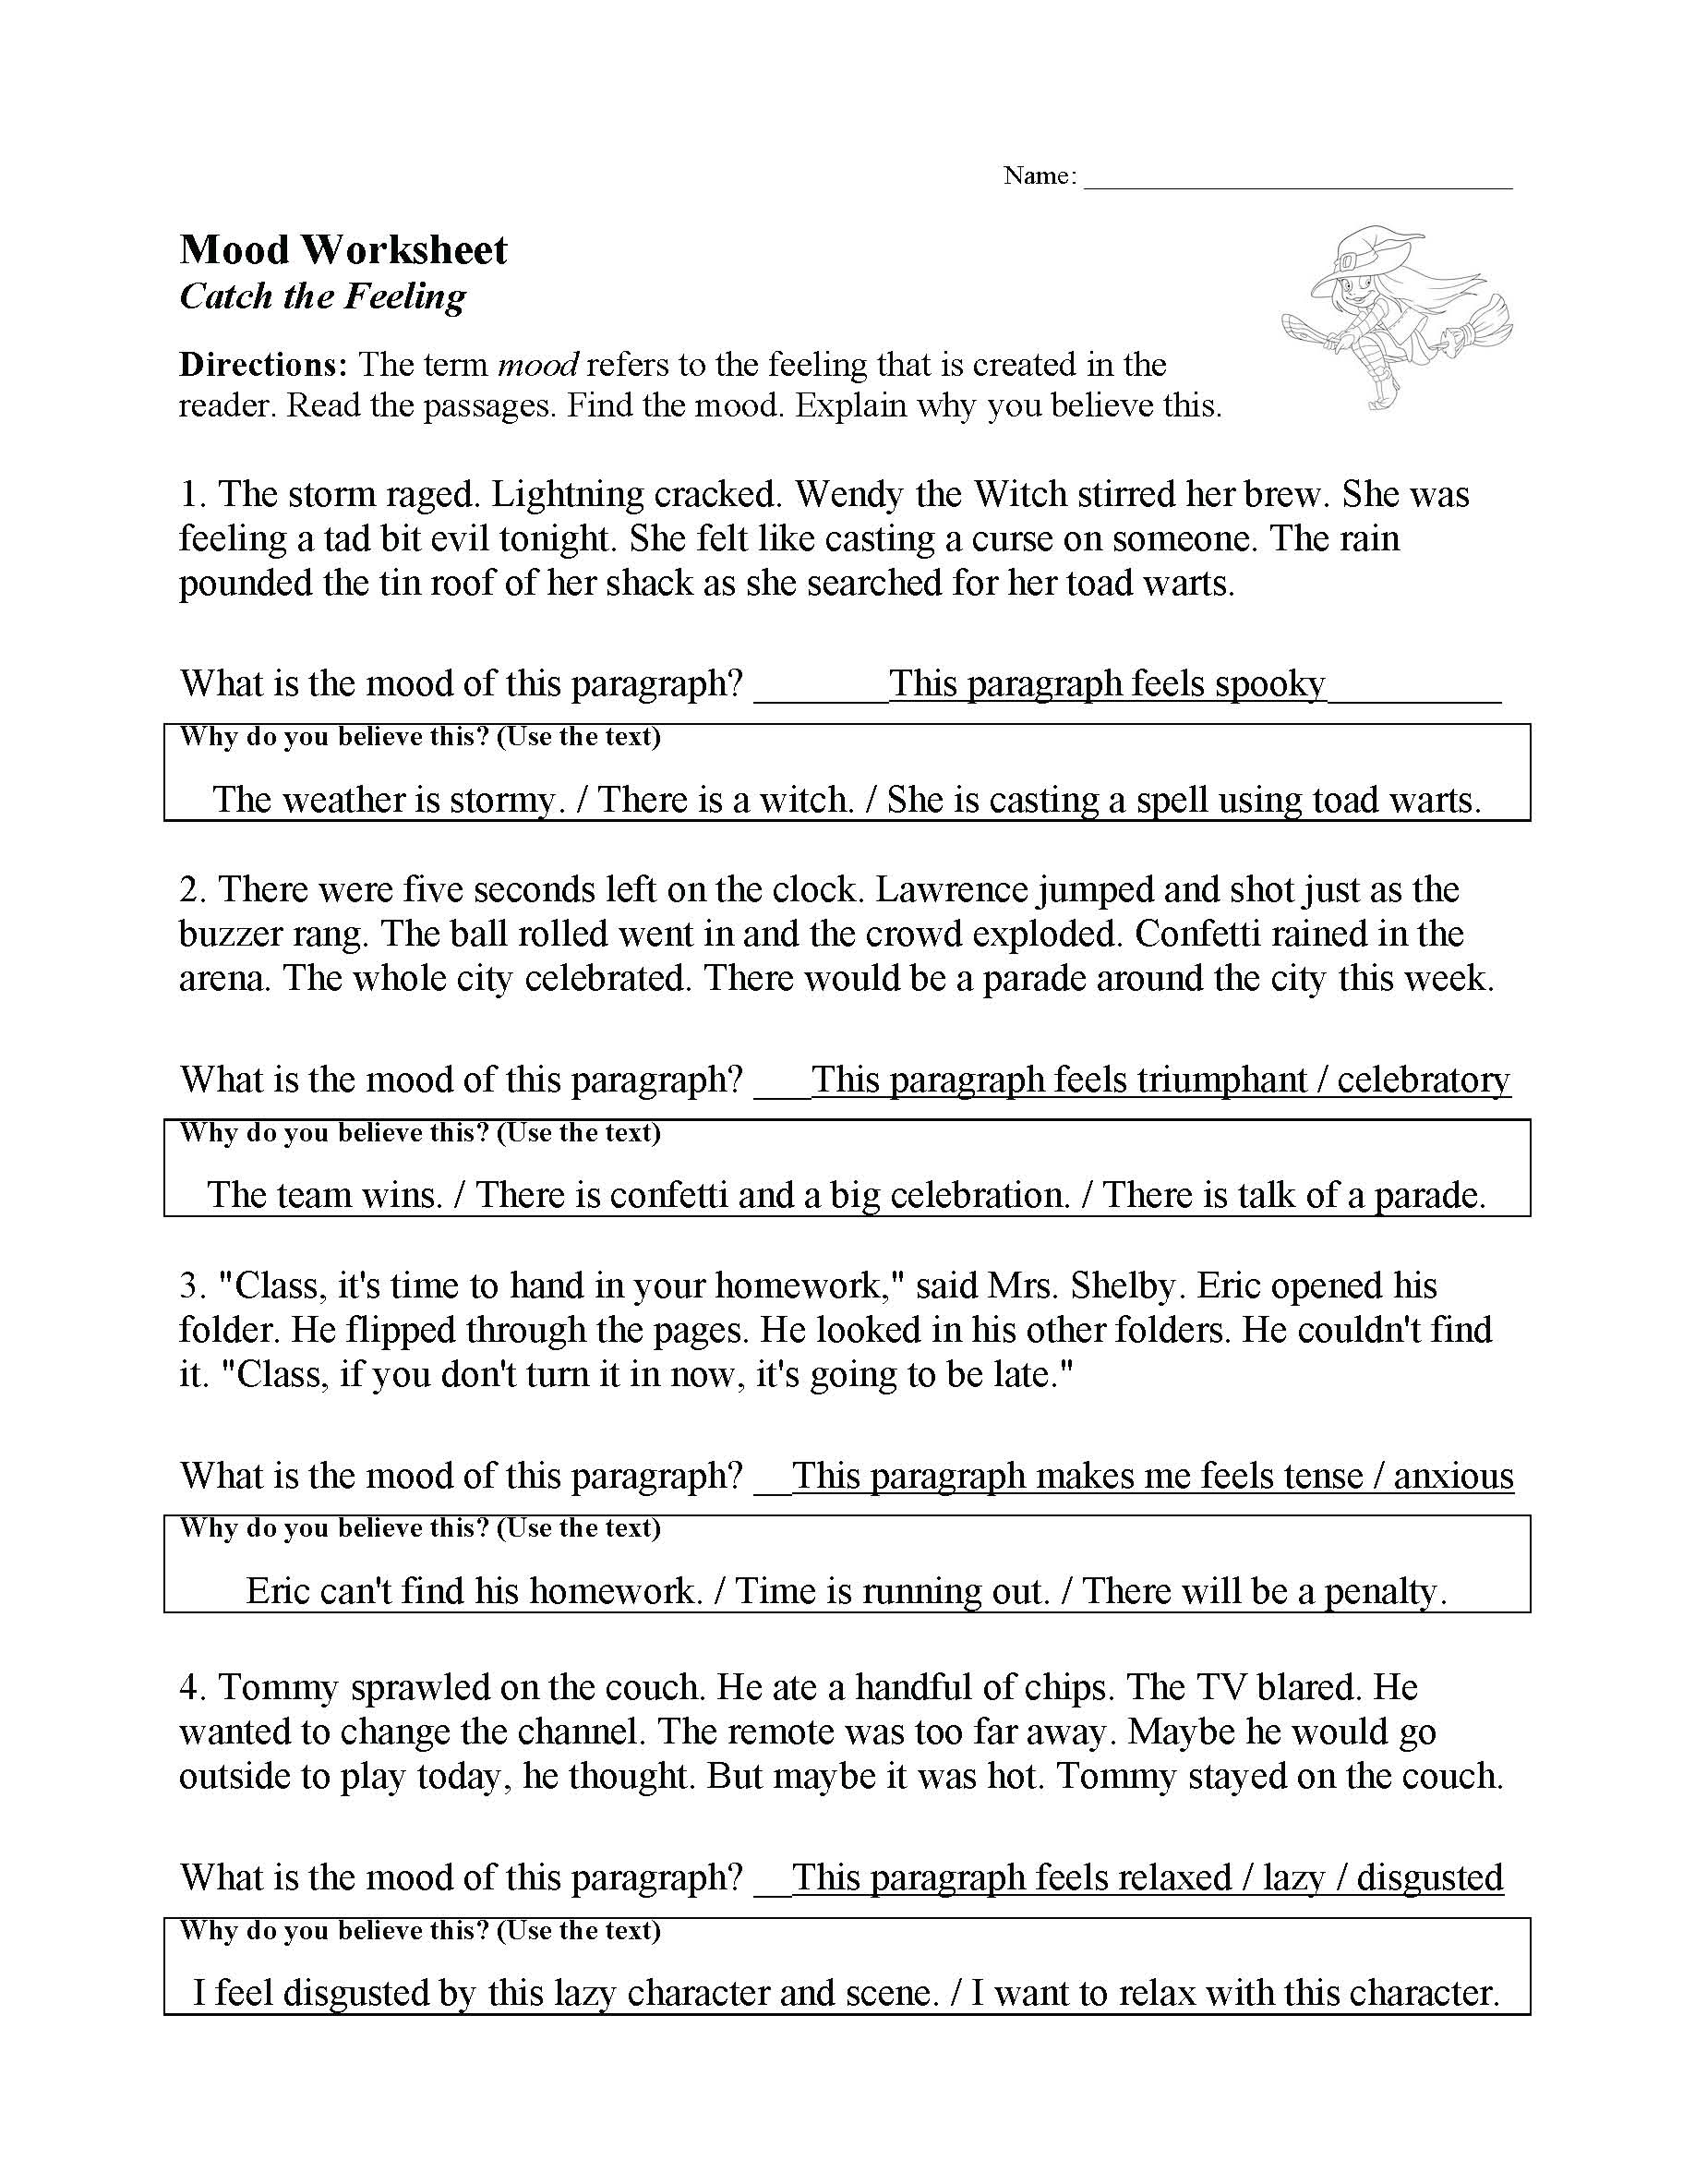 This is a preview image of our Mood Worksheet. Click on it to enlarge this image and view the source file.